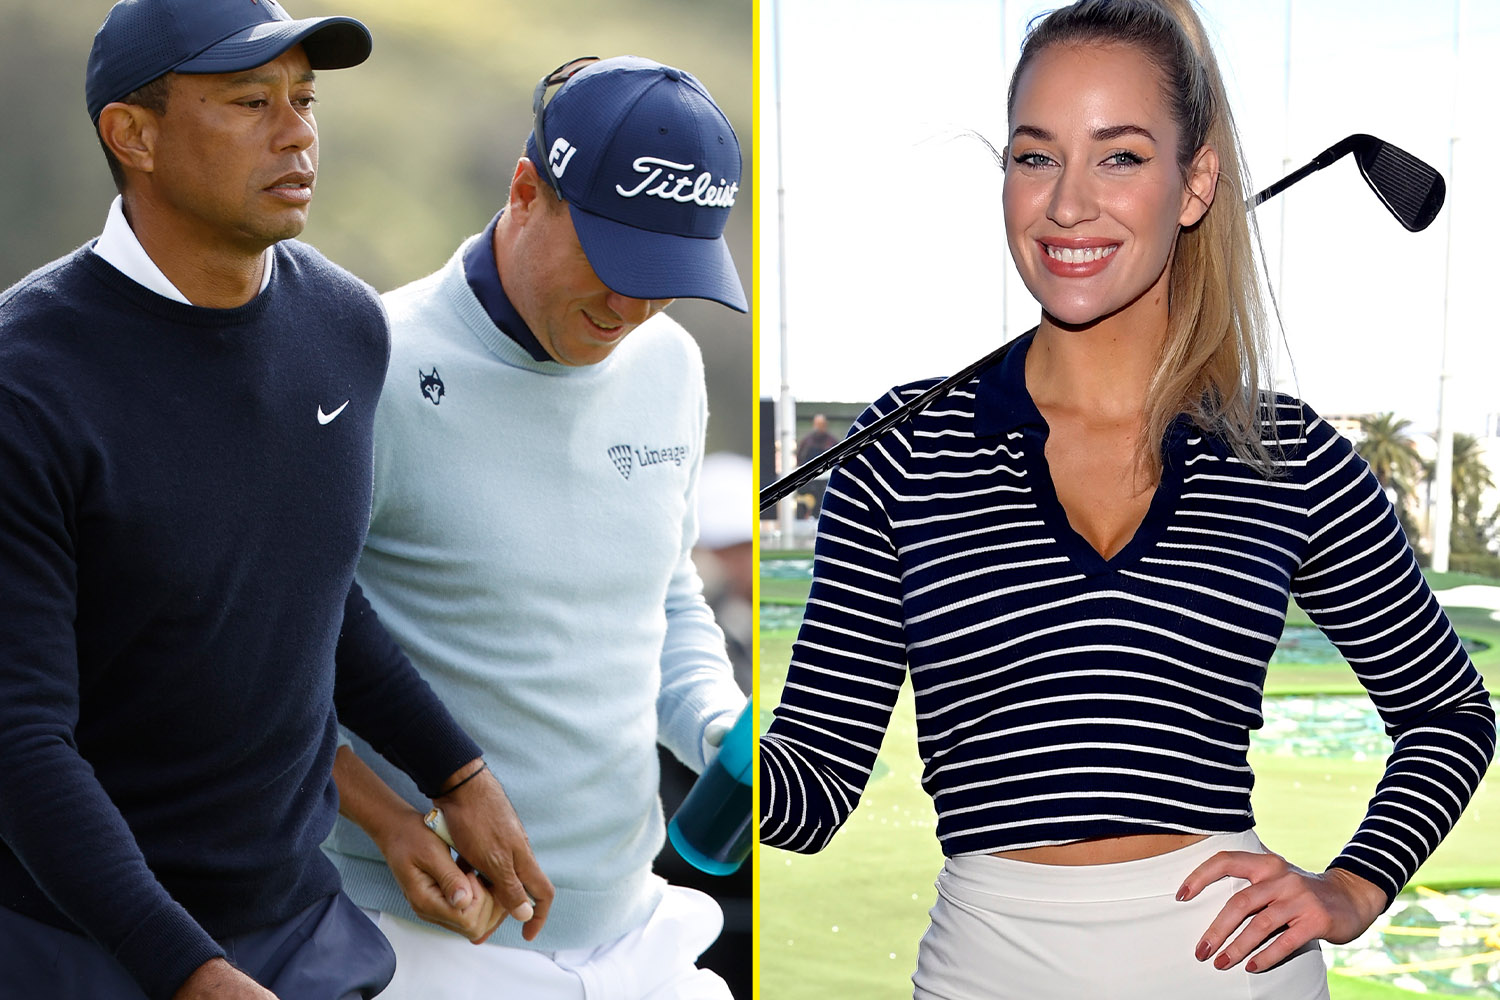 LPGA's Leona Maguire likes tweet criticising Tiger Woods handing Justin Thomas a tampon but golf influencer Paige Spiranac defends 'funny' incident